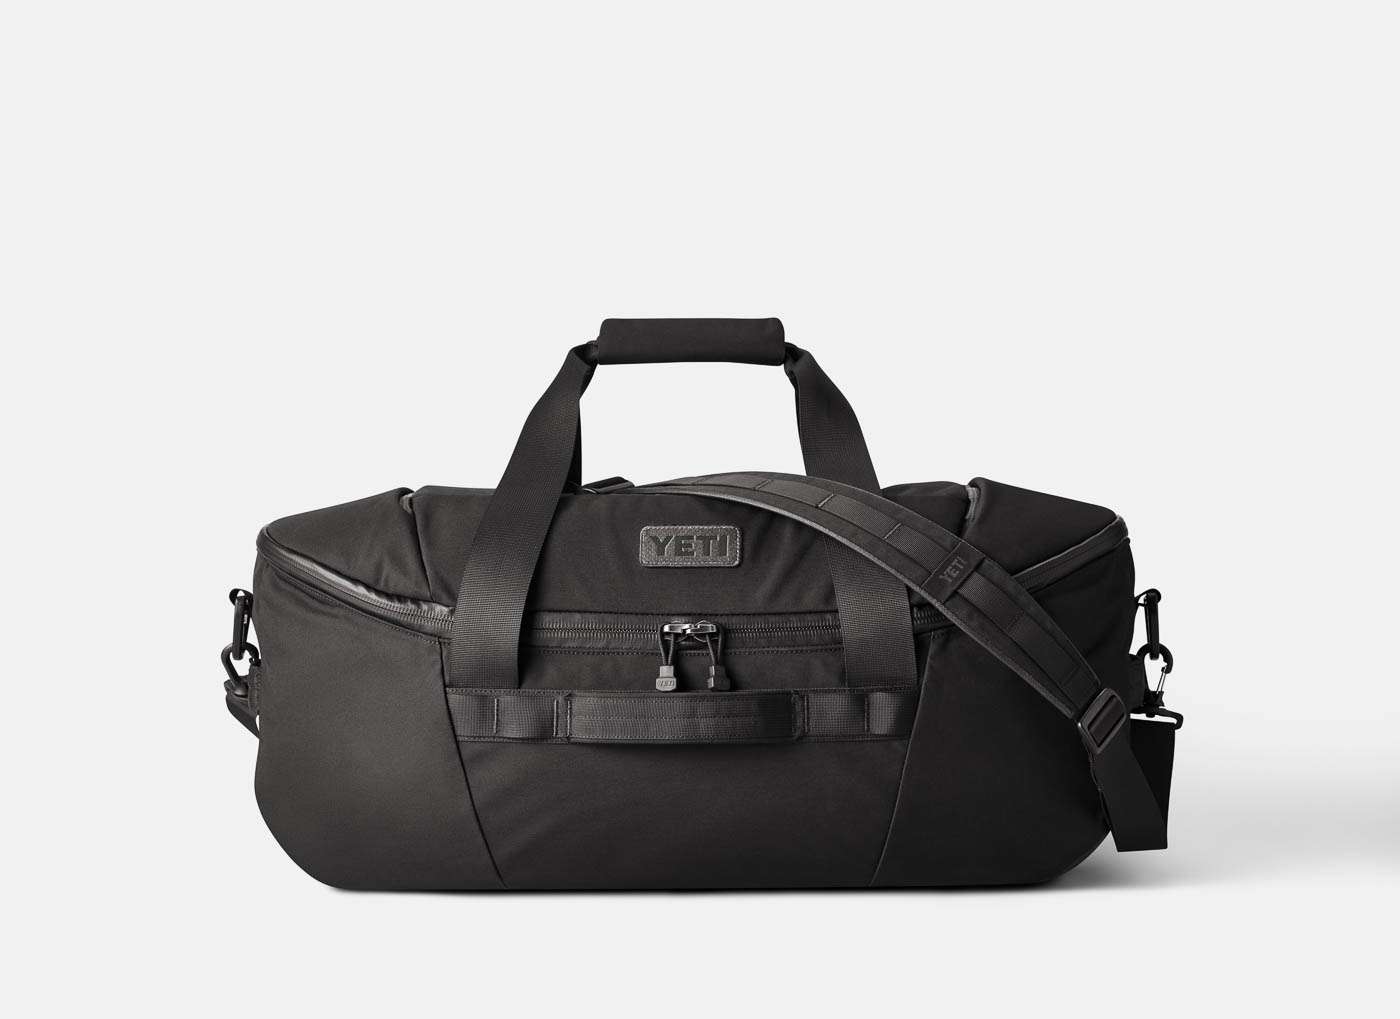 <p><strong>YETI Crossroads 60L Duffel</strong></p><p>The ultra-durable Crossroads 60L Duffel is ready to tackle road trips, long weekends, and far-flung adventures. Organize and re-organize all of your gear as you go with two Divider Panels that separate the bag into three sections. Prefer a wide opening with ample room? Simply fold the dividers away when not in use. And unlike other duffels, this one has Structured Foam Walls to keep it from folding in on itself. $249.99. <a href=